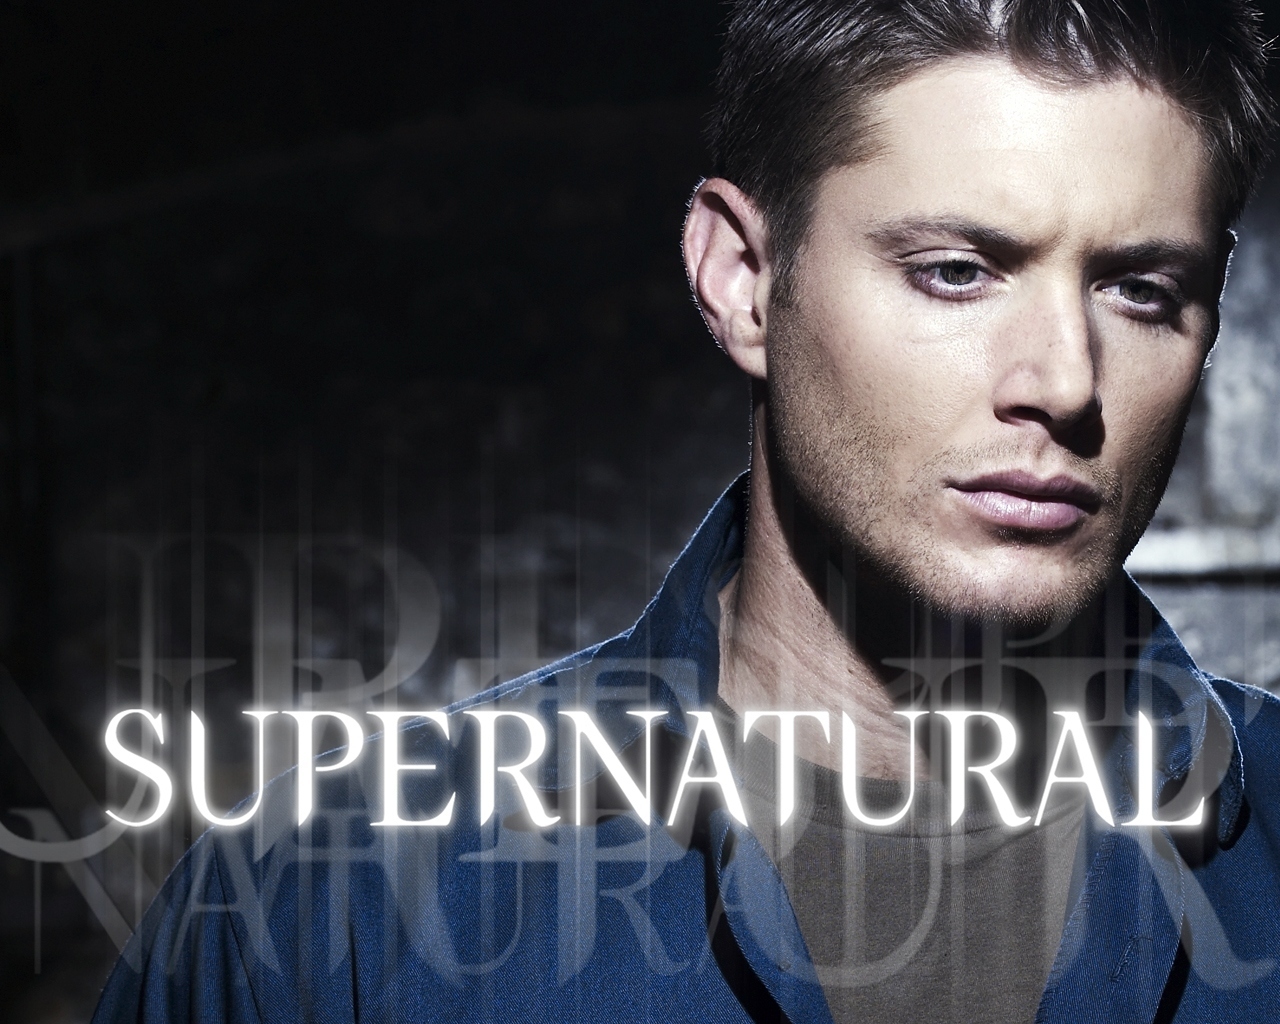 ... ackles, Dean Winchester, Supernatural, images, pictures, wallpapers